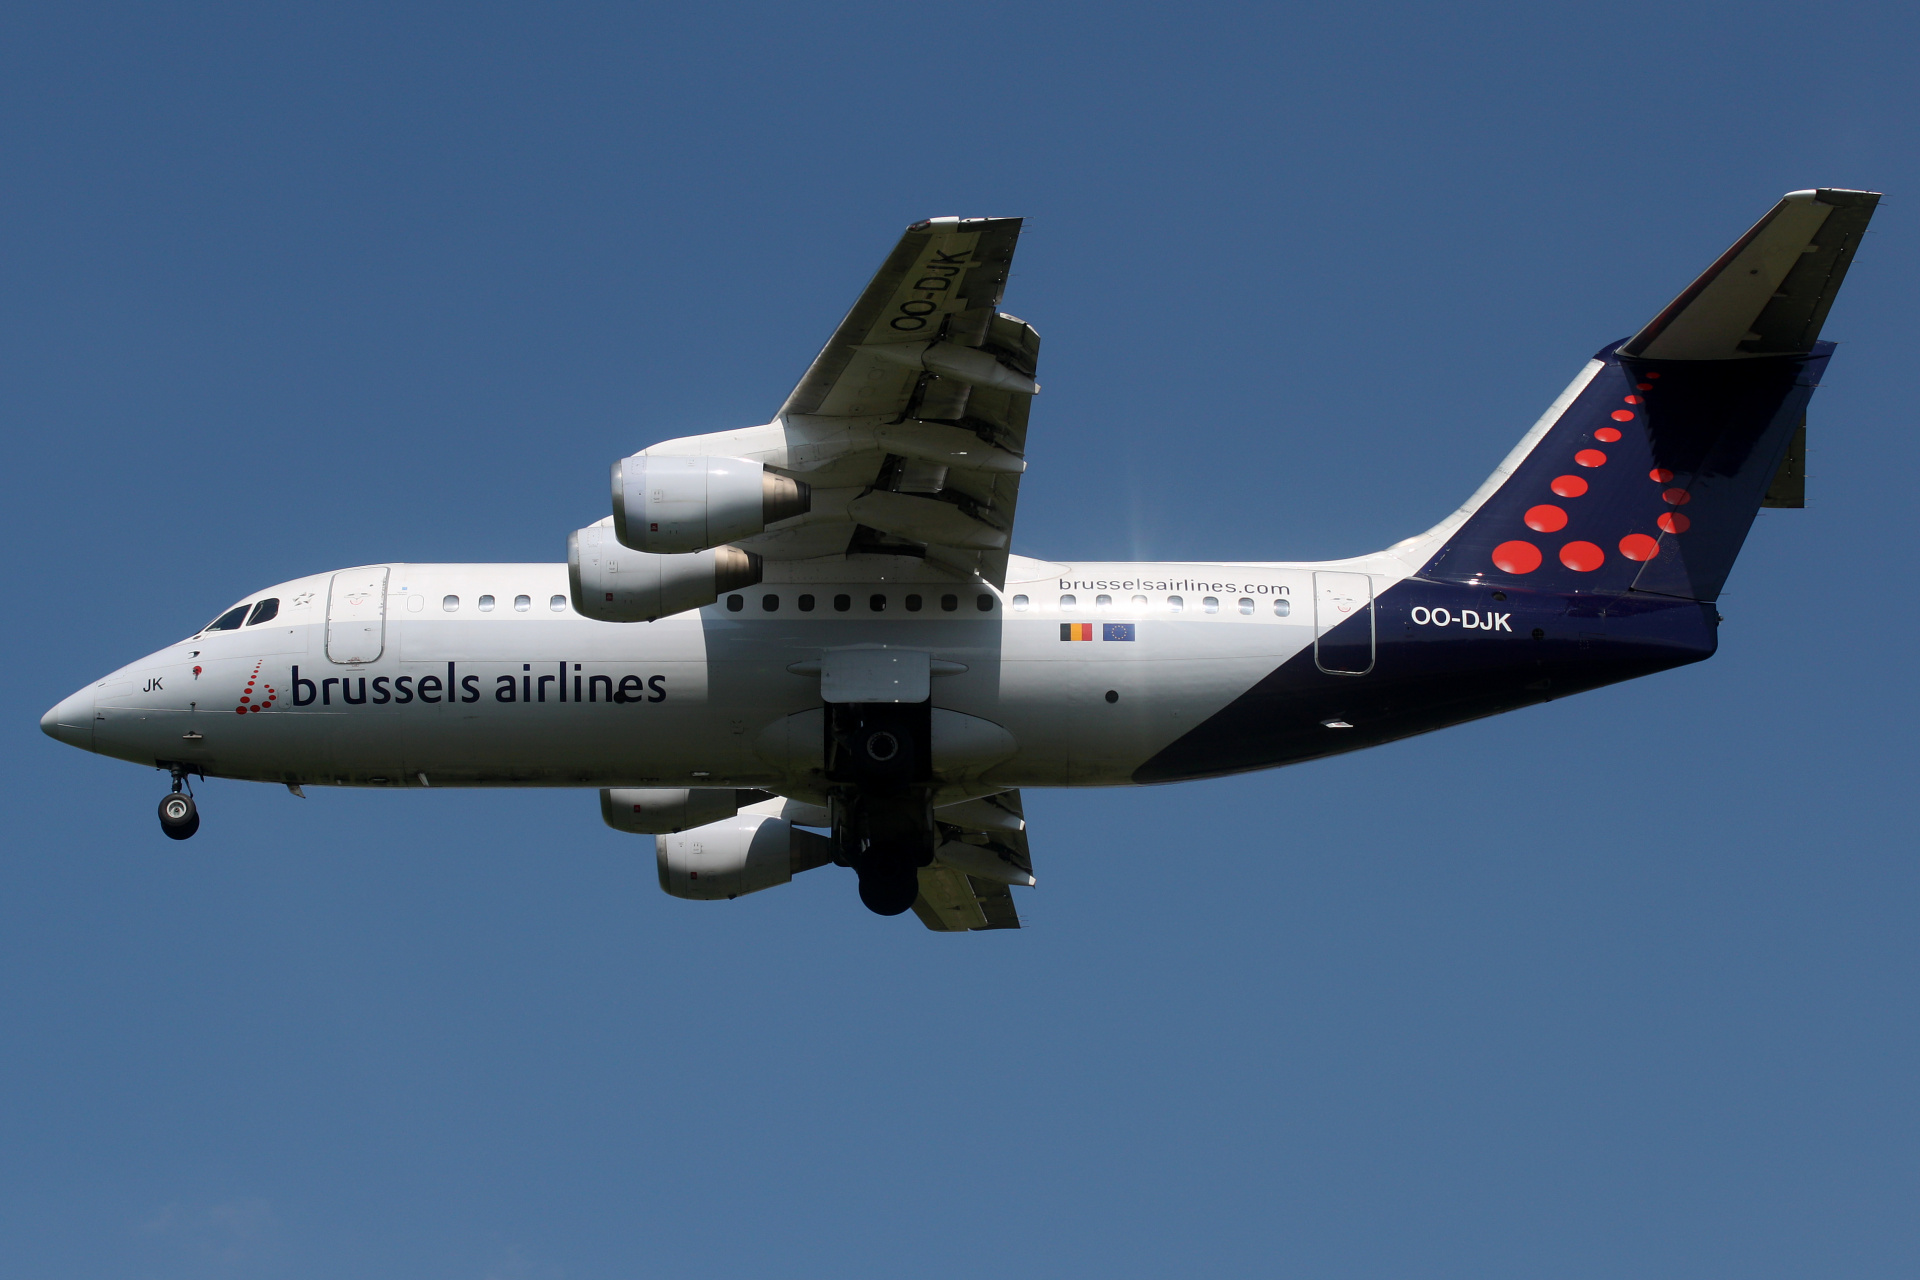 OO-DJK (Aircraft » EPWA Spotting » BAe 146 and revisions » Avro RJ85 » Brussels Airlines)